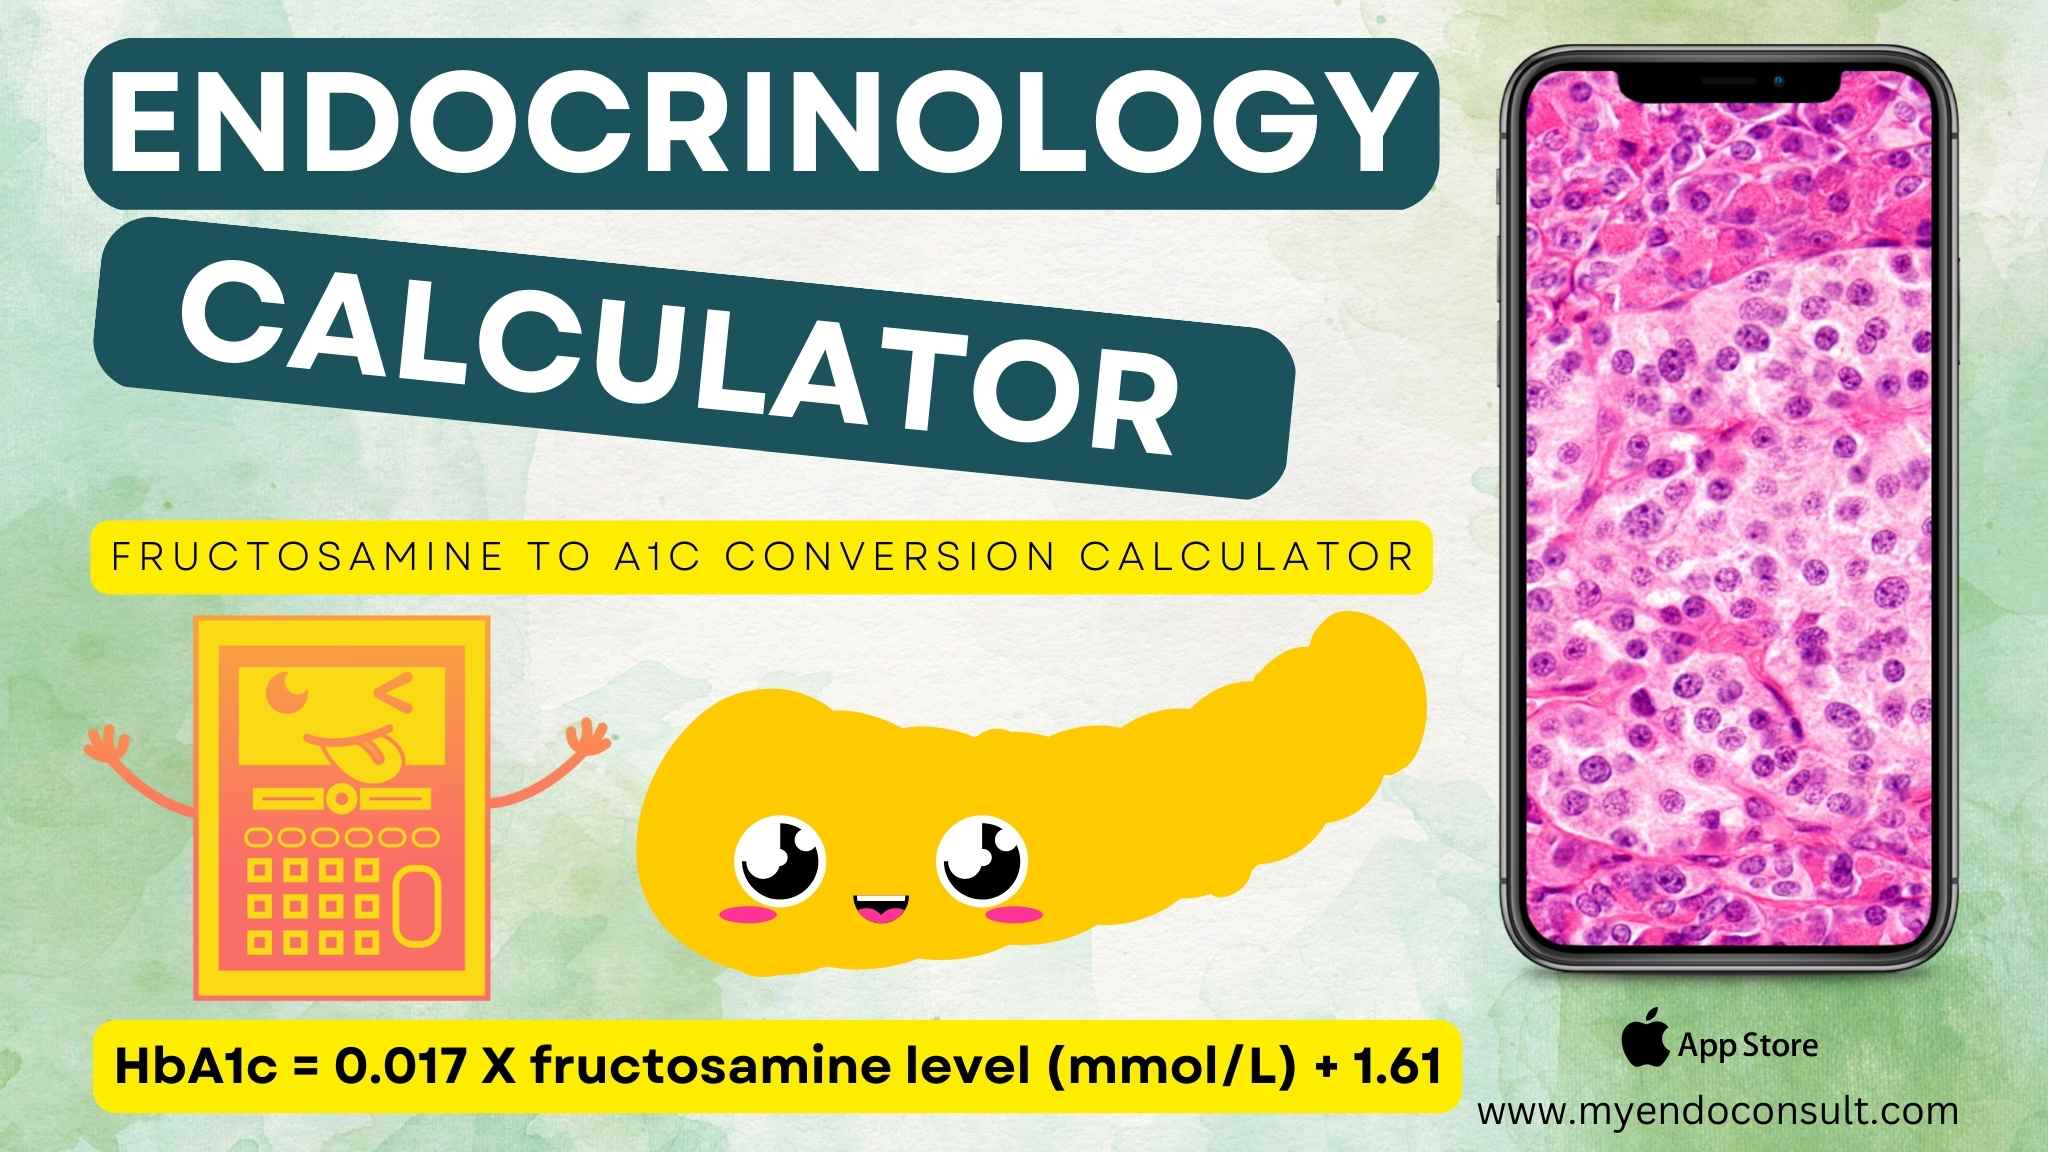 fructosamine-to-a1c-conversion-calculator-my-endo-consult